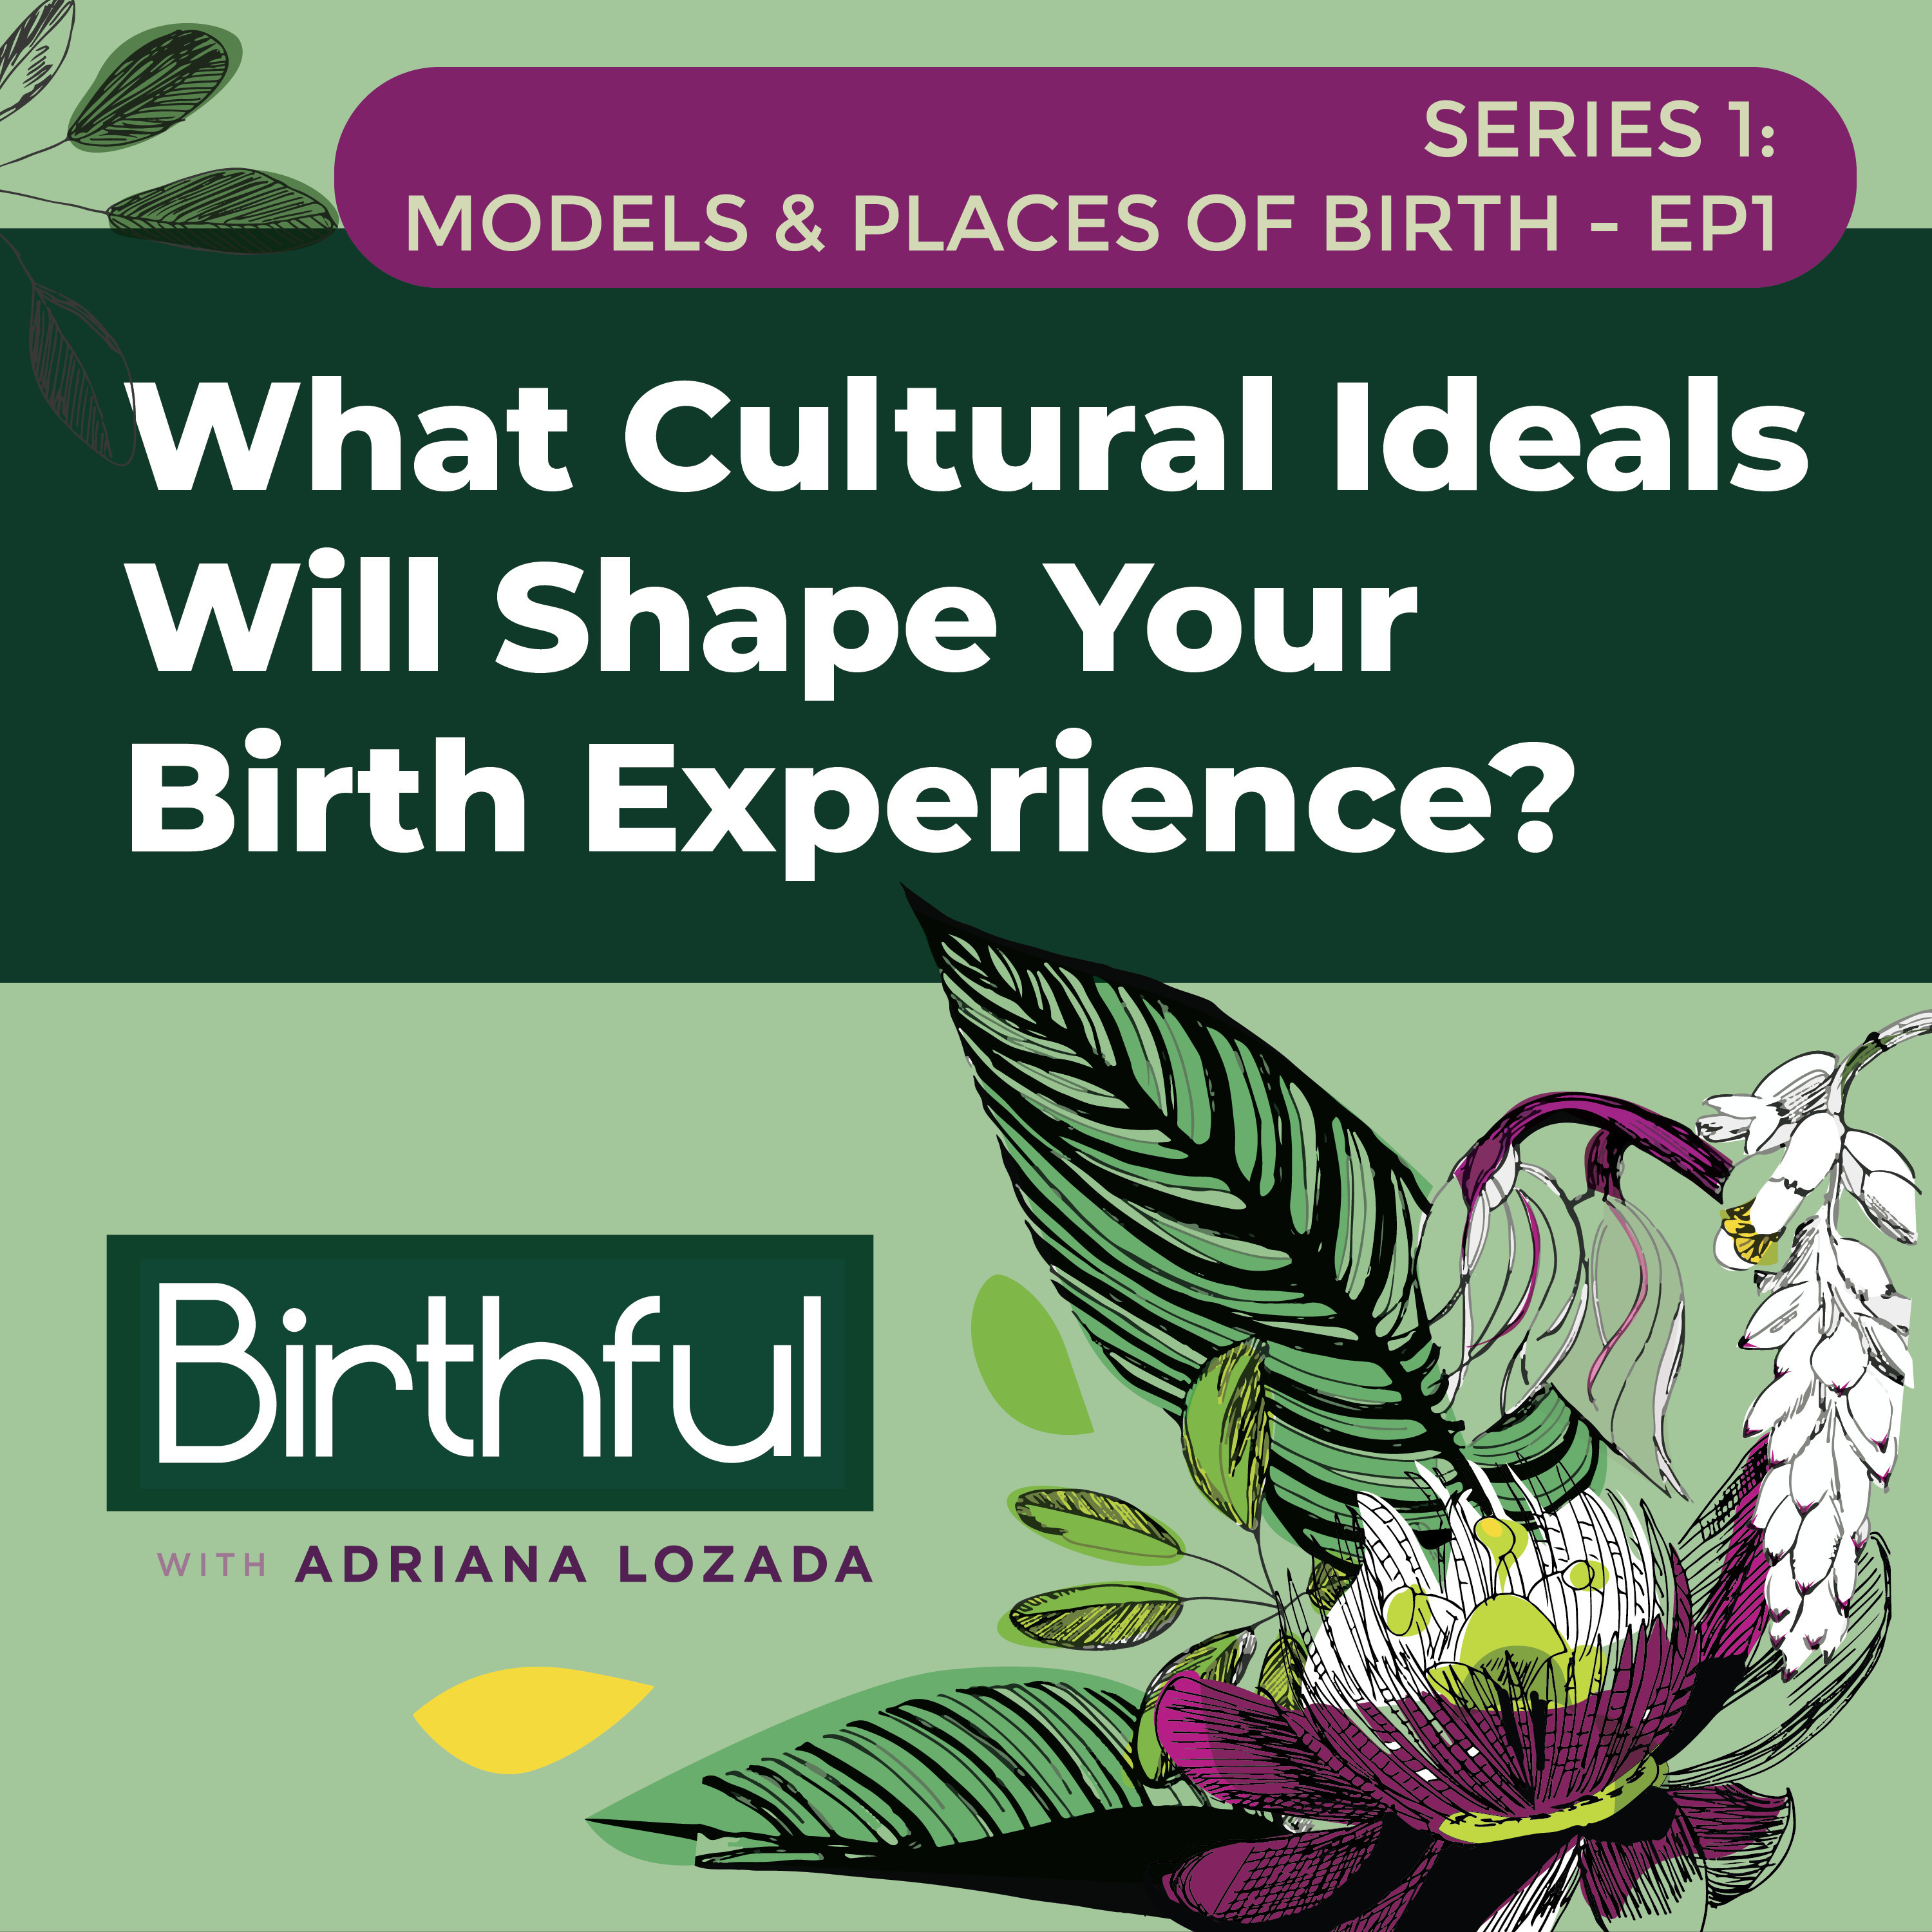 What Cultural Ideals Will Shape Your Birth Experience?